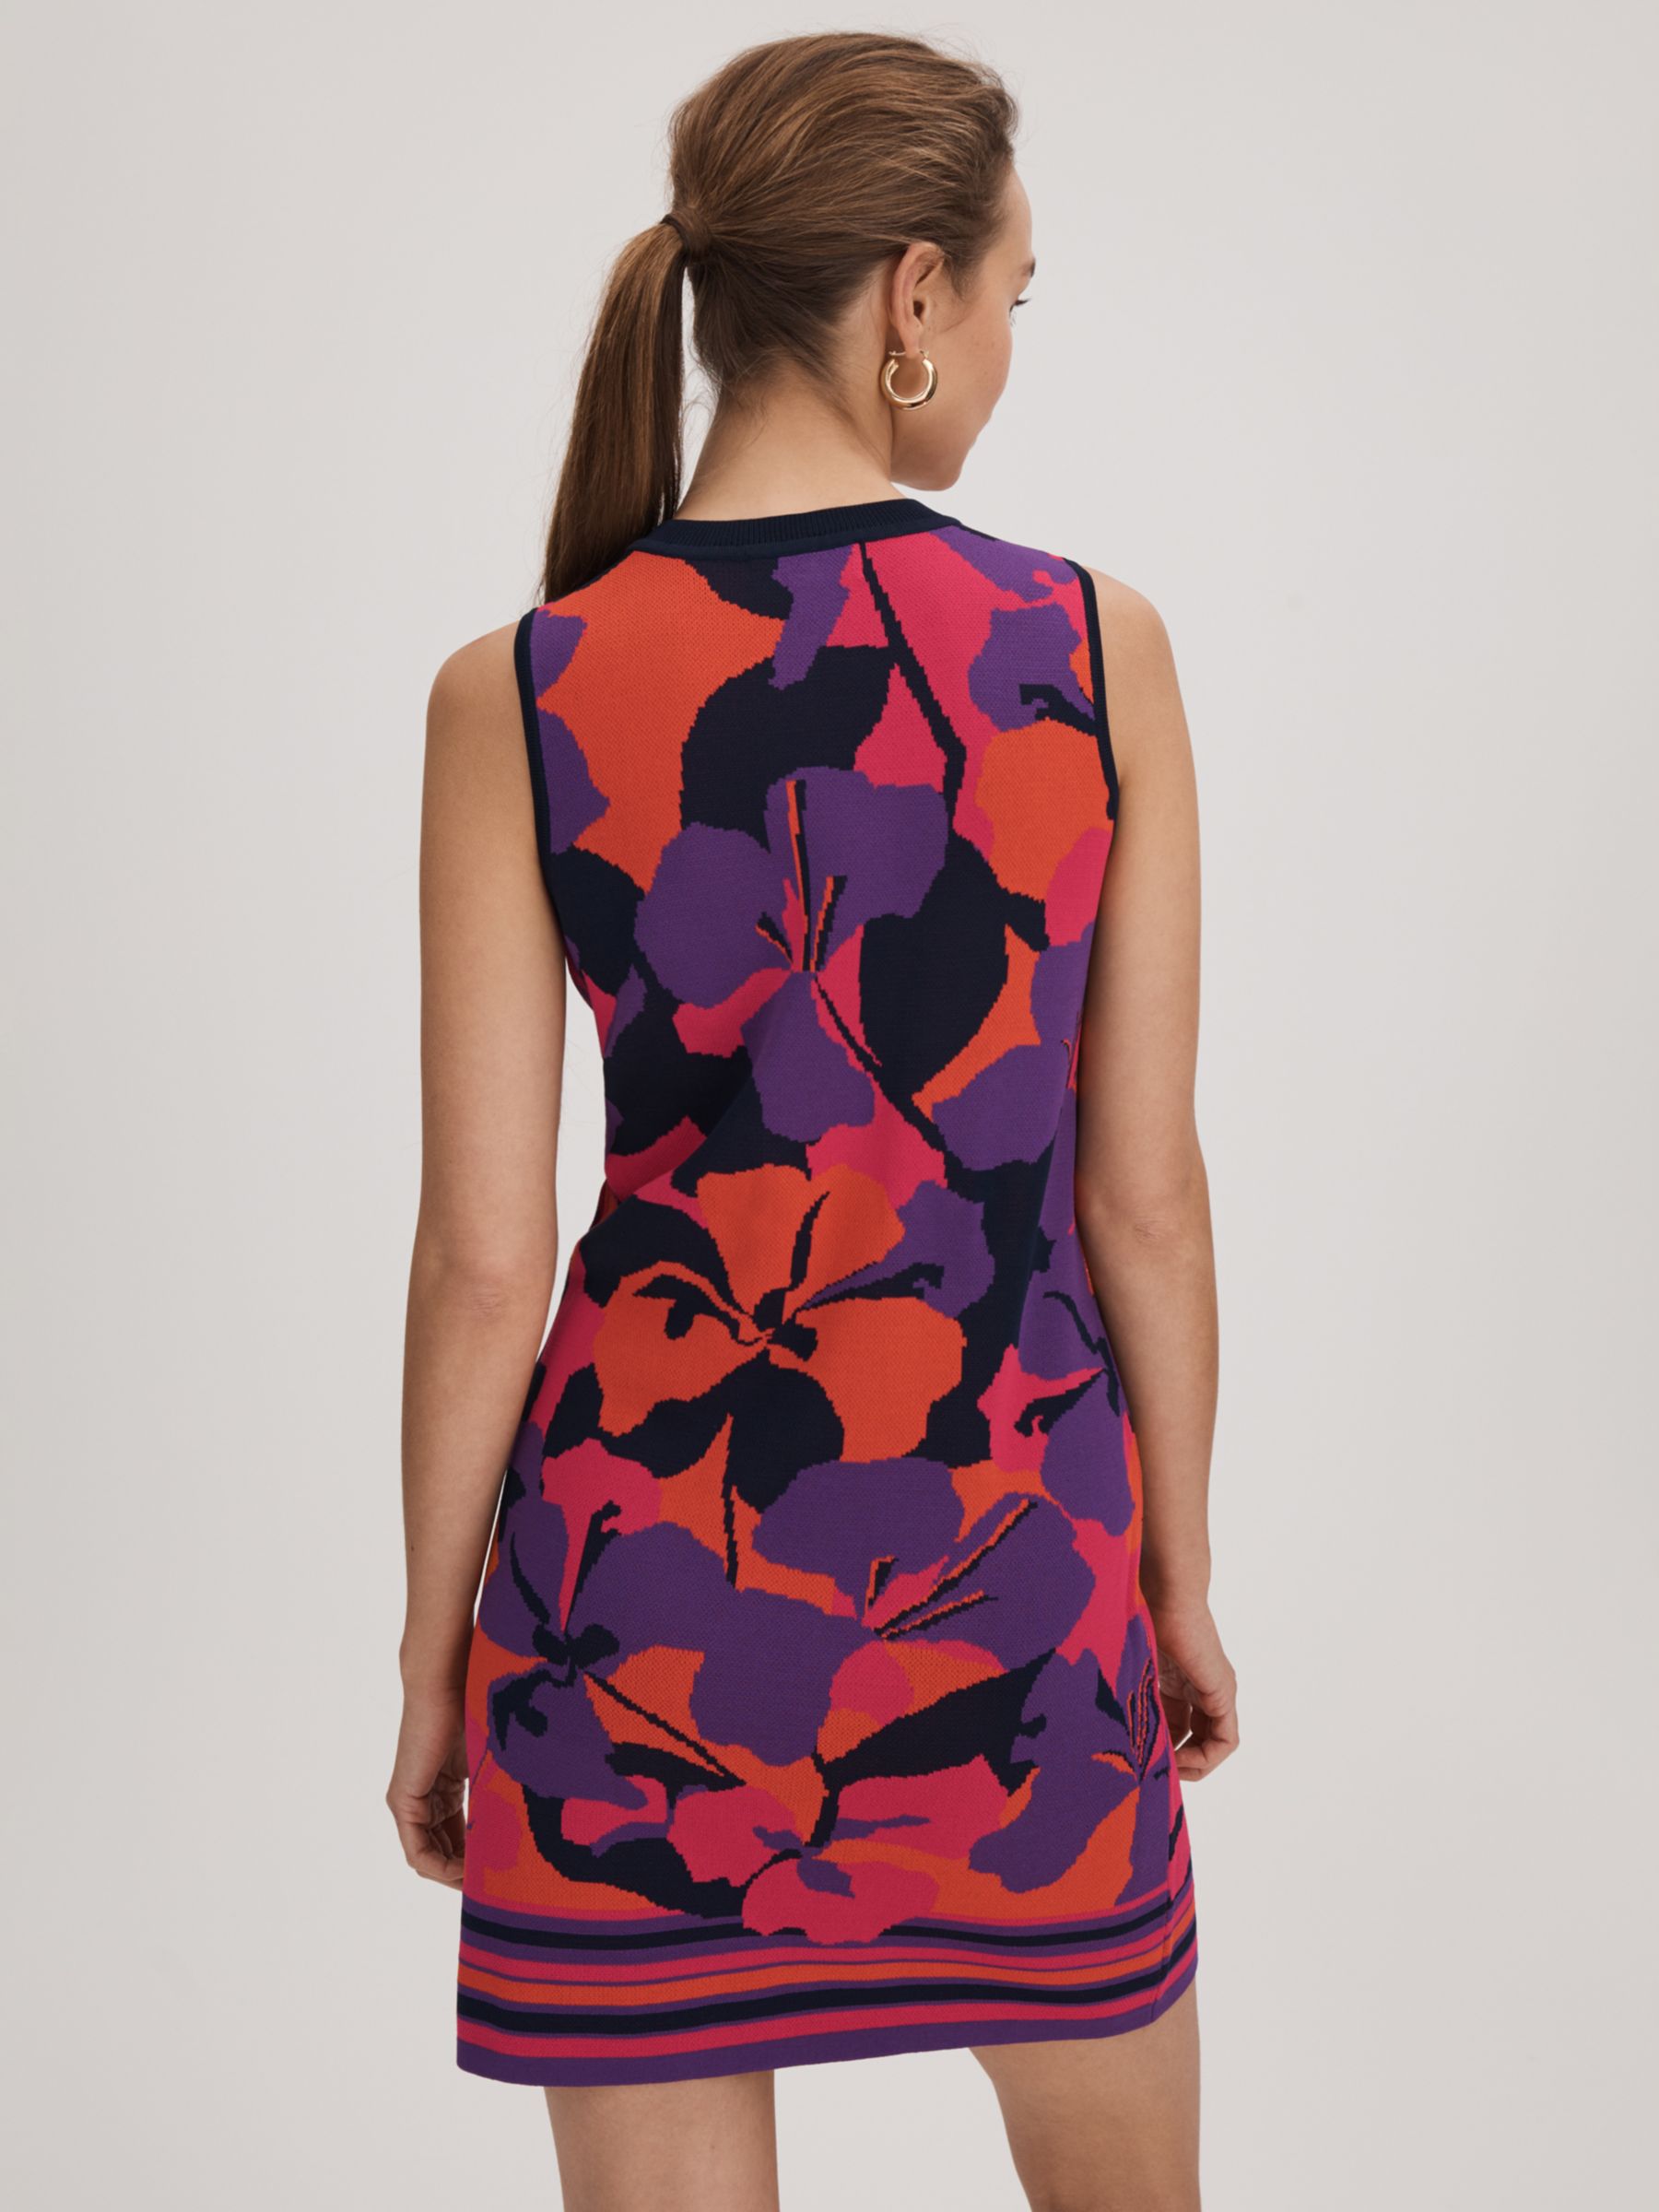 Buy FLORERE Jacquard Knit Abstract Floral Mini Dress, Pink/Multi Online at johnlewis.com